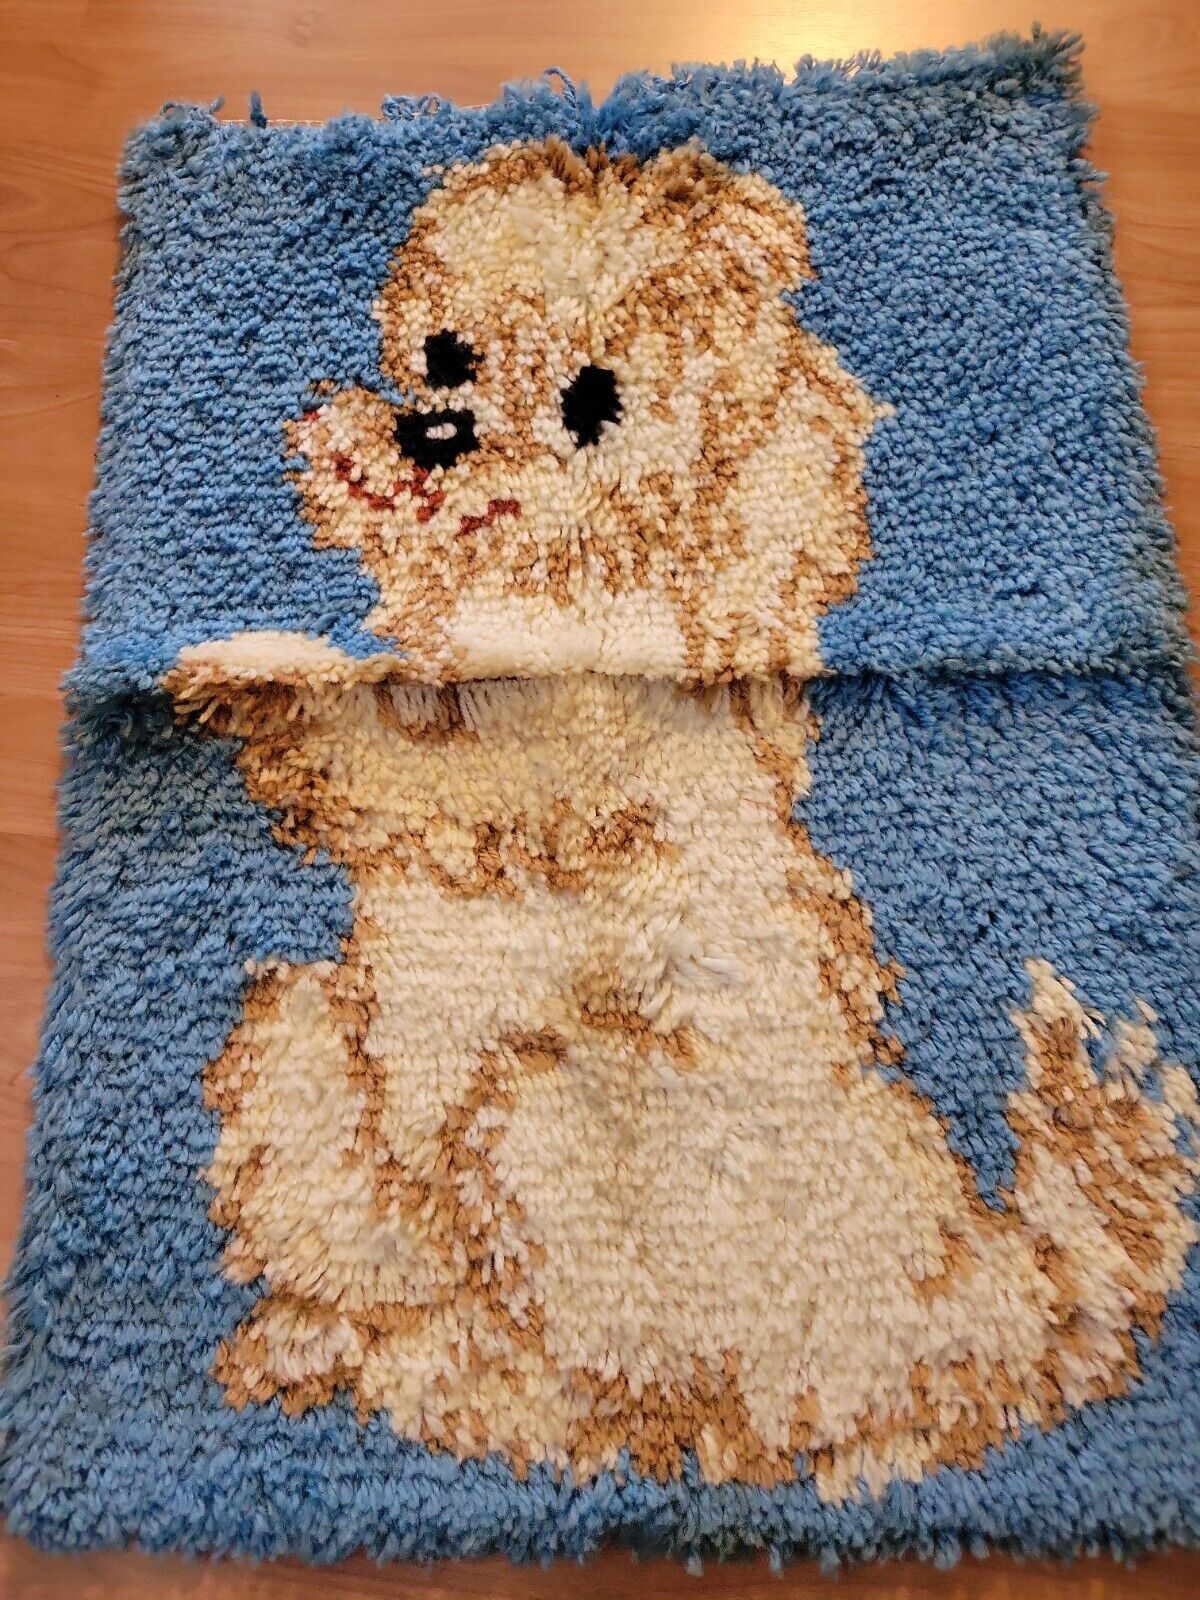 Vintage Latch Hook Completed Rug Wall Hanging Puppy Image 18